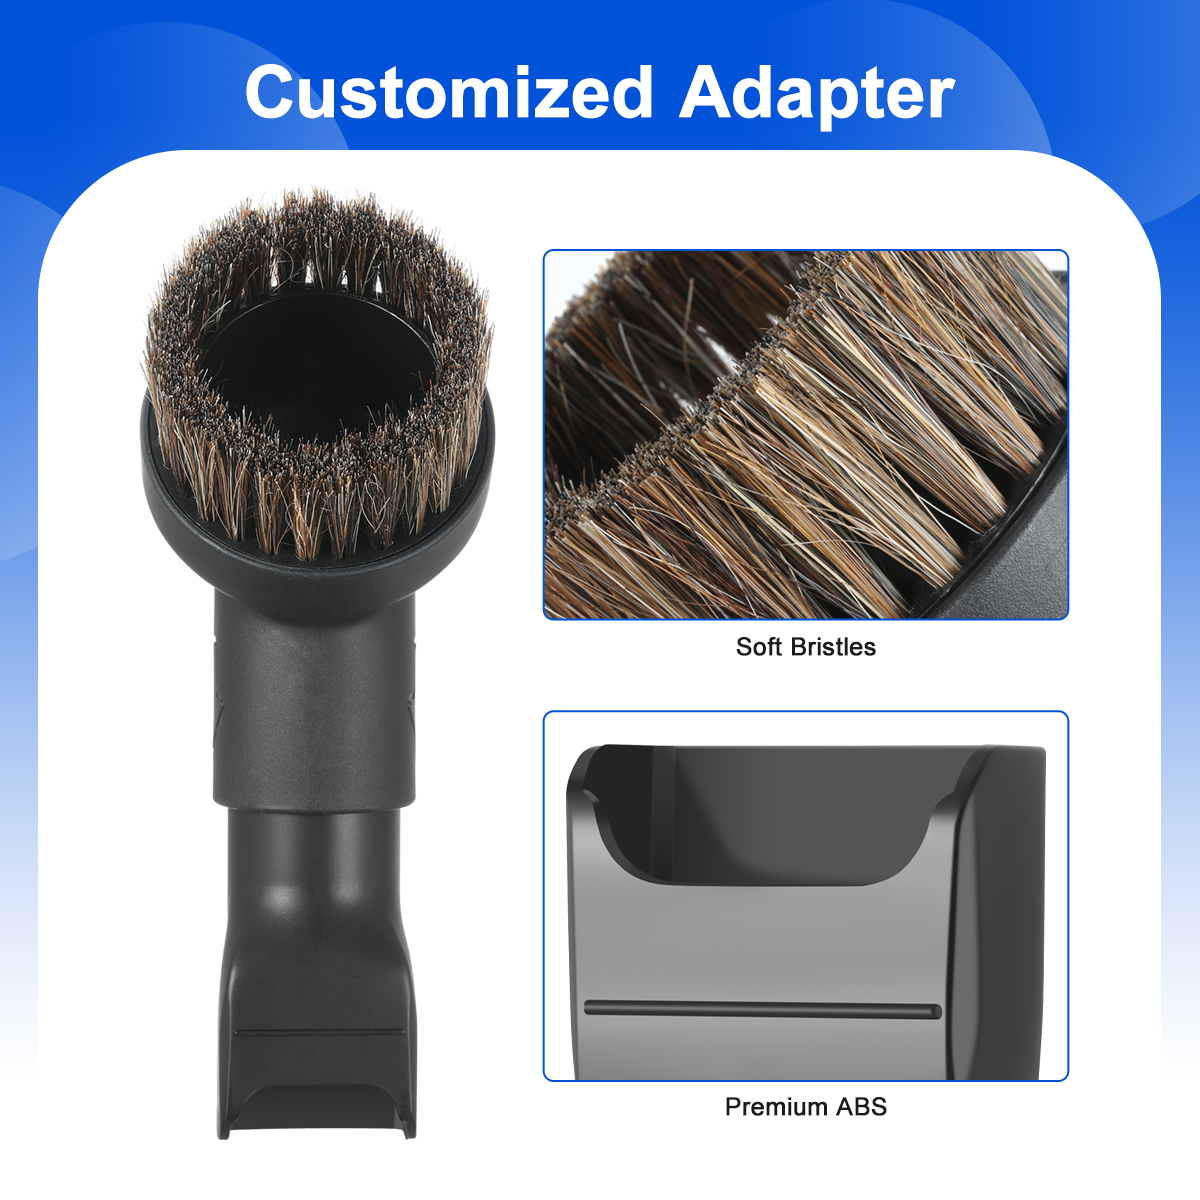 Horse Hair Brush Attachment Adapter made of soft bristles and premium ABS.